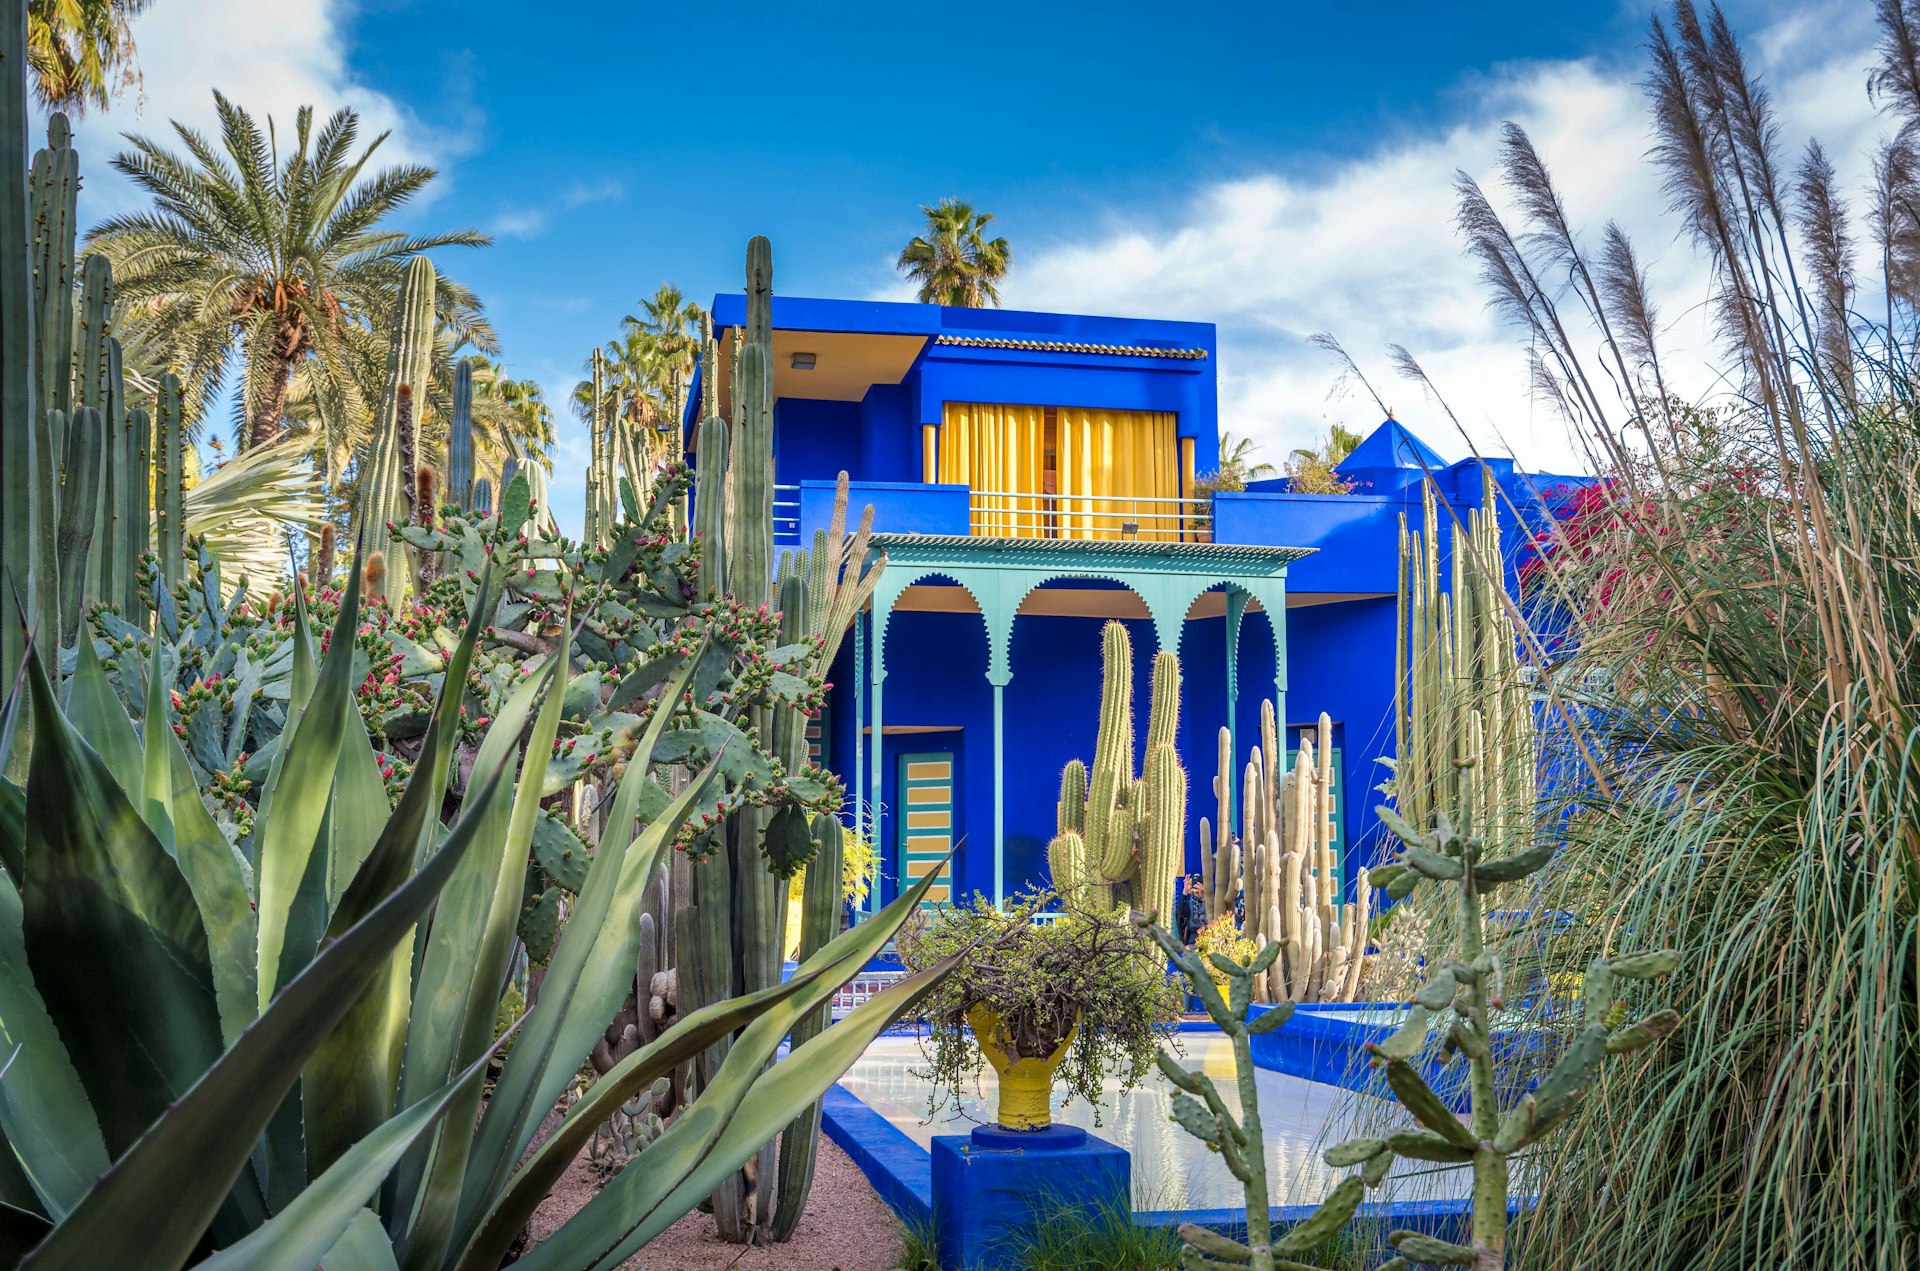 A striking blue building with yellow features sits in a cactus-filled garden